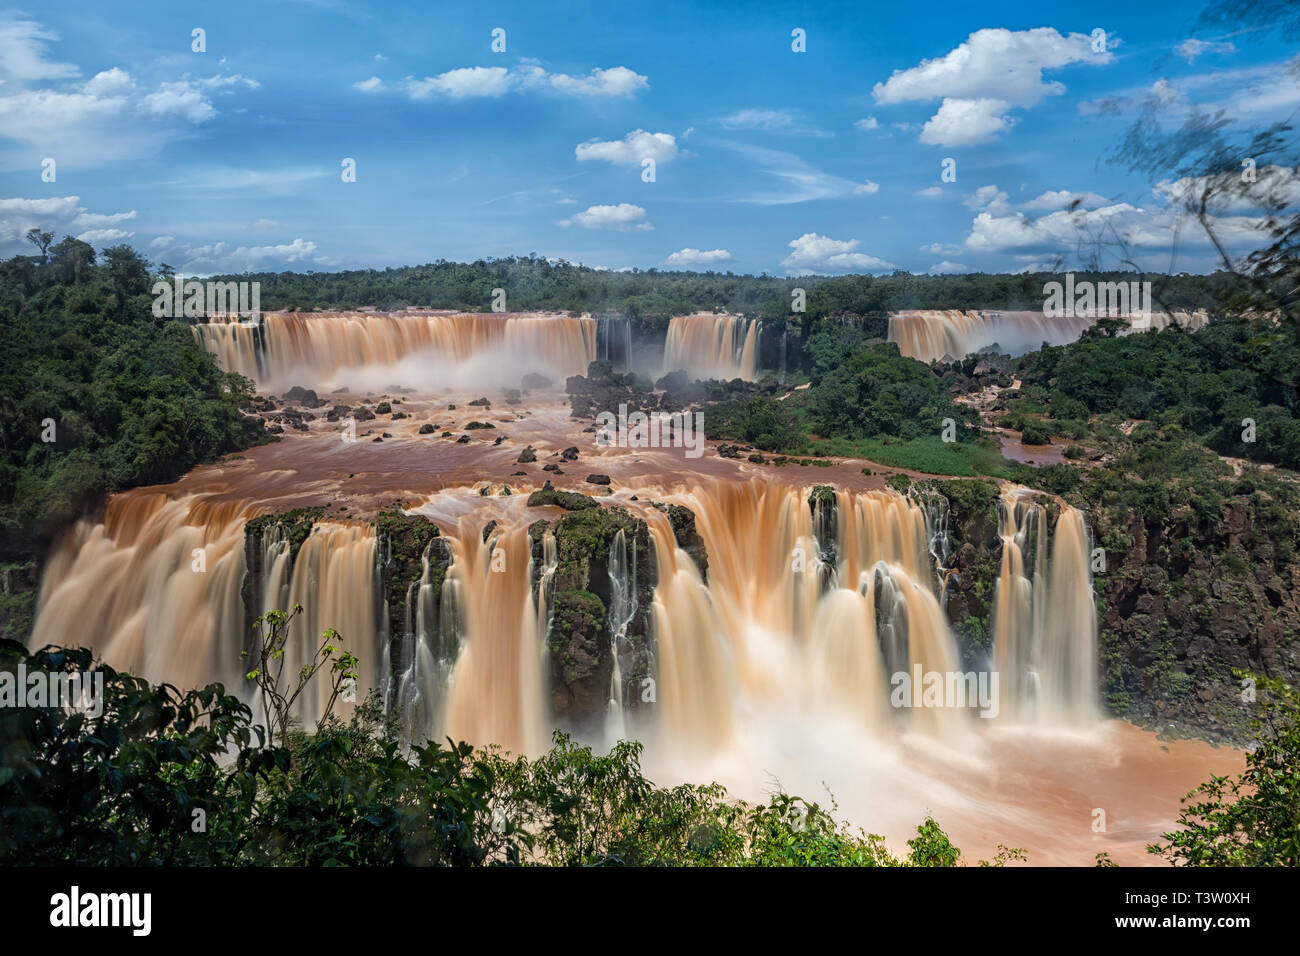 The Iguazu Falls on the Argentine side. Photographed from the Brazilian side. Stock Photo